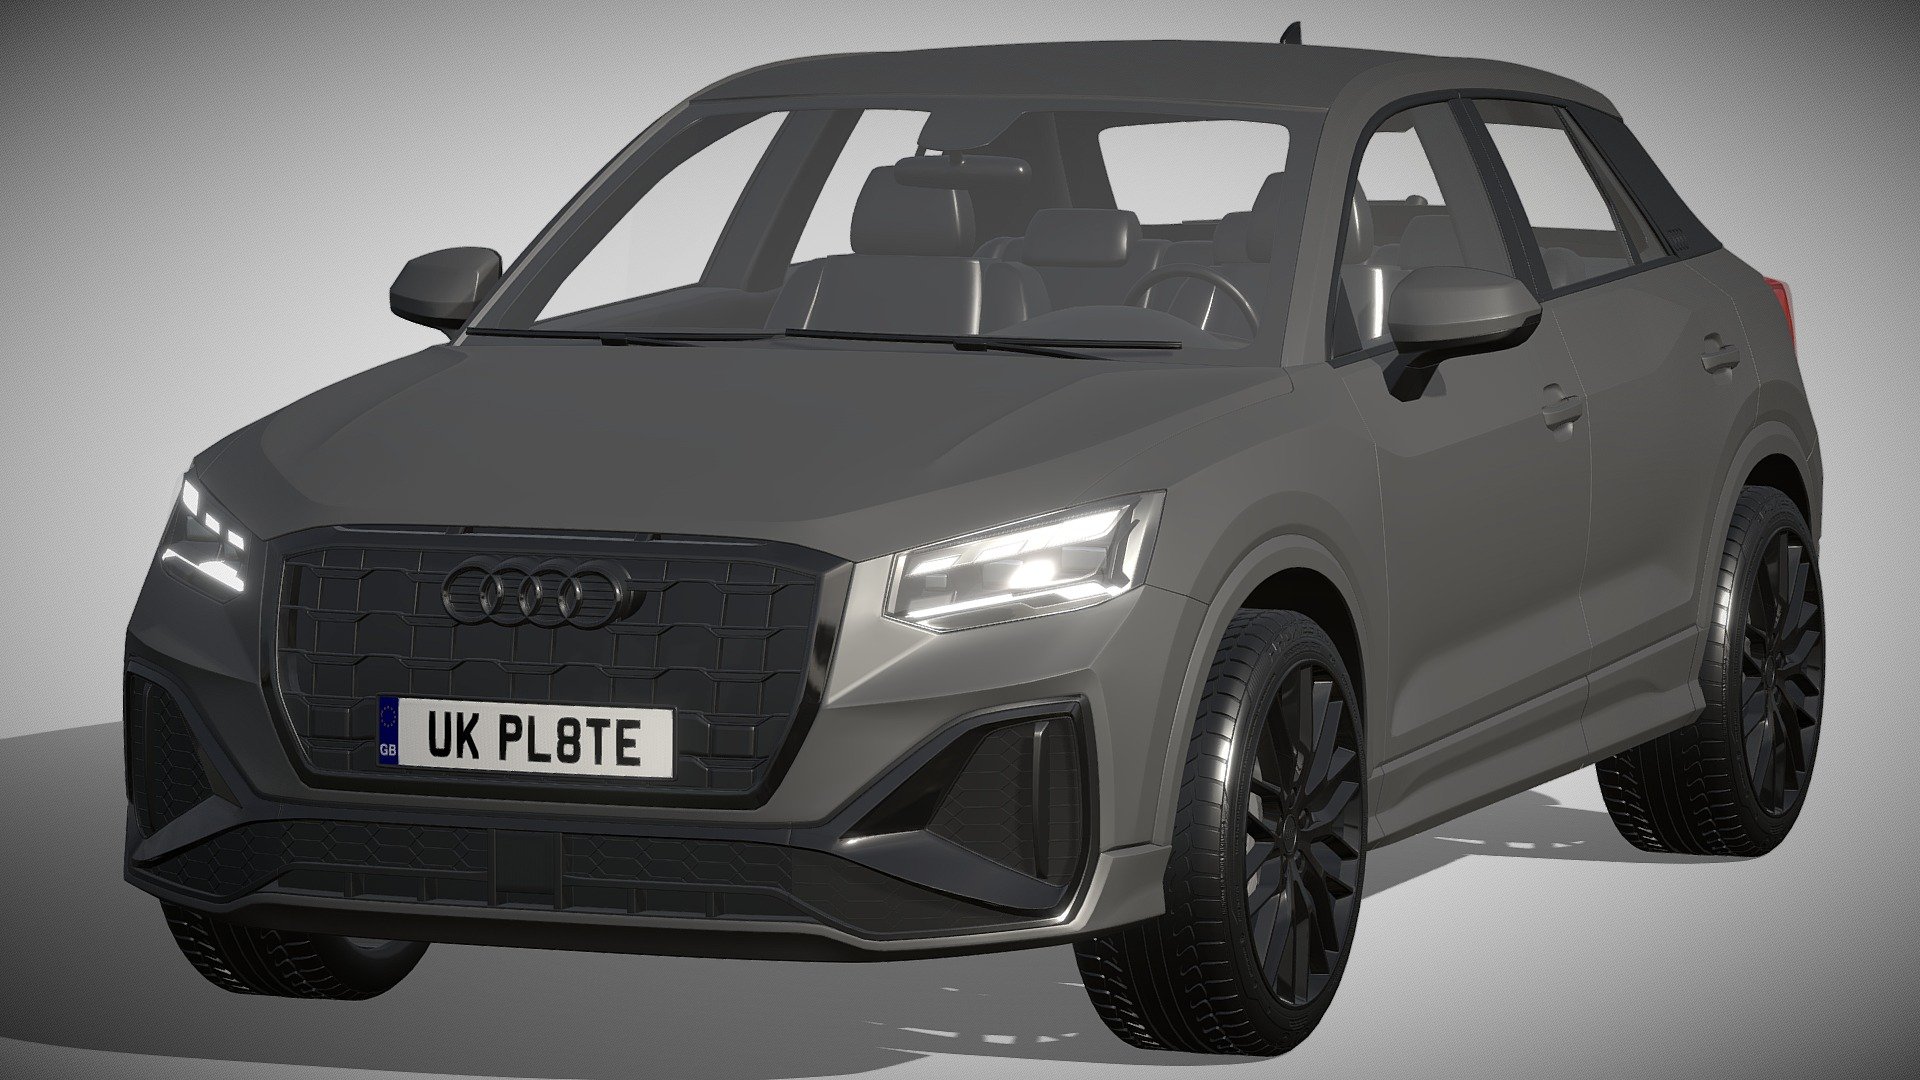 Audi Q2 2021

https://www.audi.de/de/brand/de/neuwagen/q2/q2.html

Clean geometry Light weight model, yet completely detailed for HI-Res renders. Use for movies, Advertisements or games

Corona render and materials

All textures include in *.rar files

Lighting setup is not included in the file! - Audi Q2 2021 - Buy Royalty Free 3D model by zifir3d 3d model